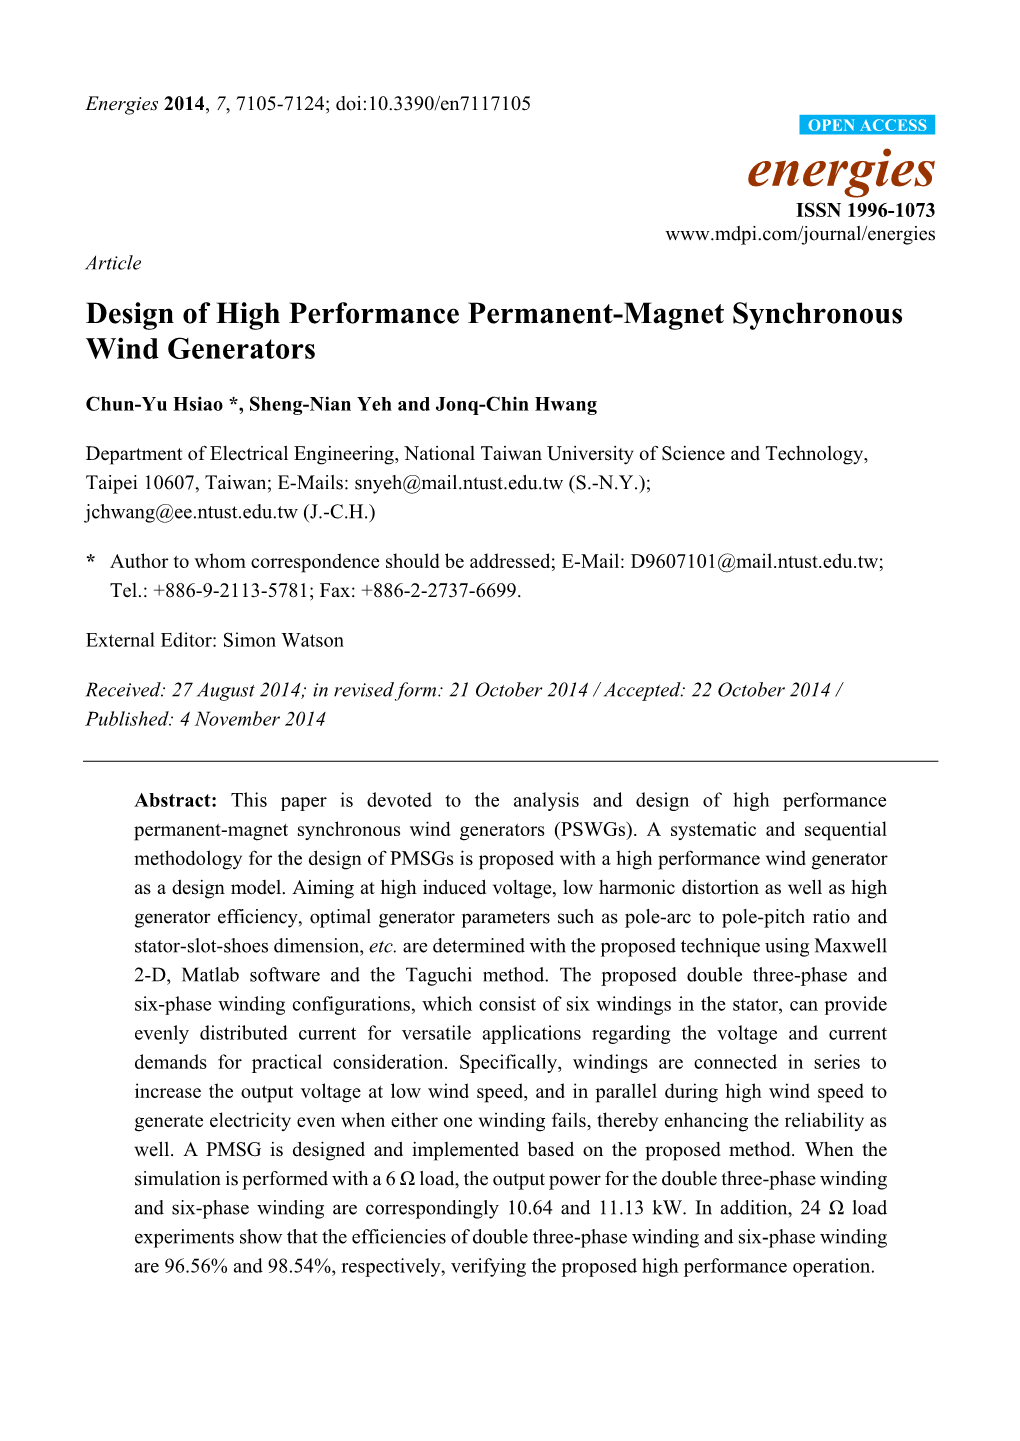 Design of High Performance Permanent-Magnet Synchronous Wind Generators